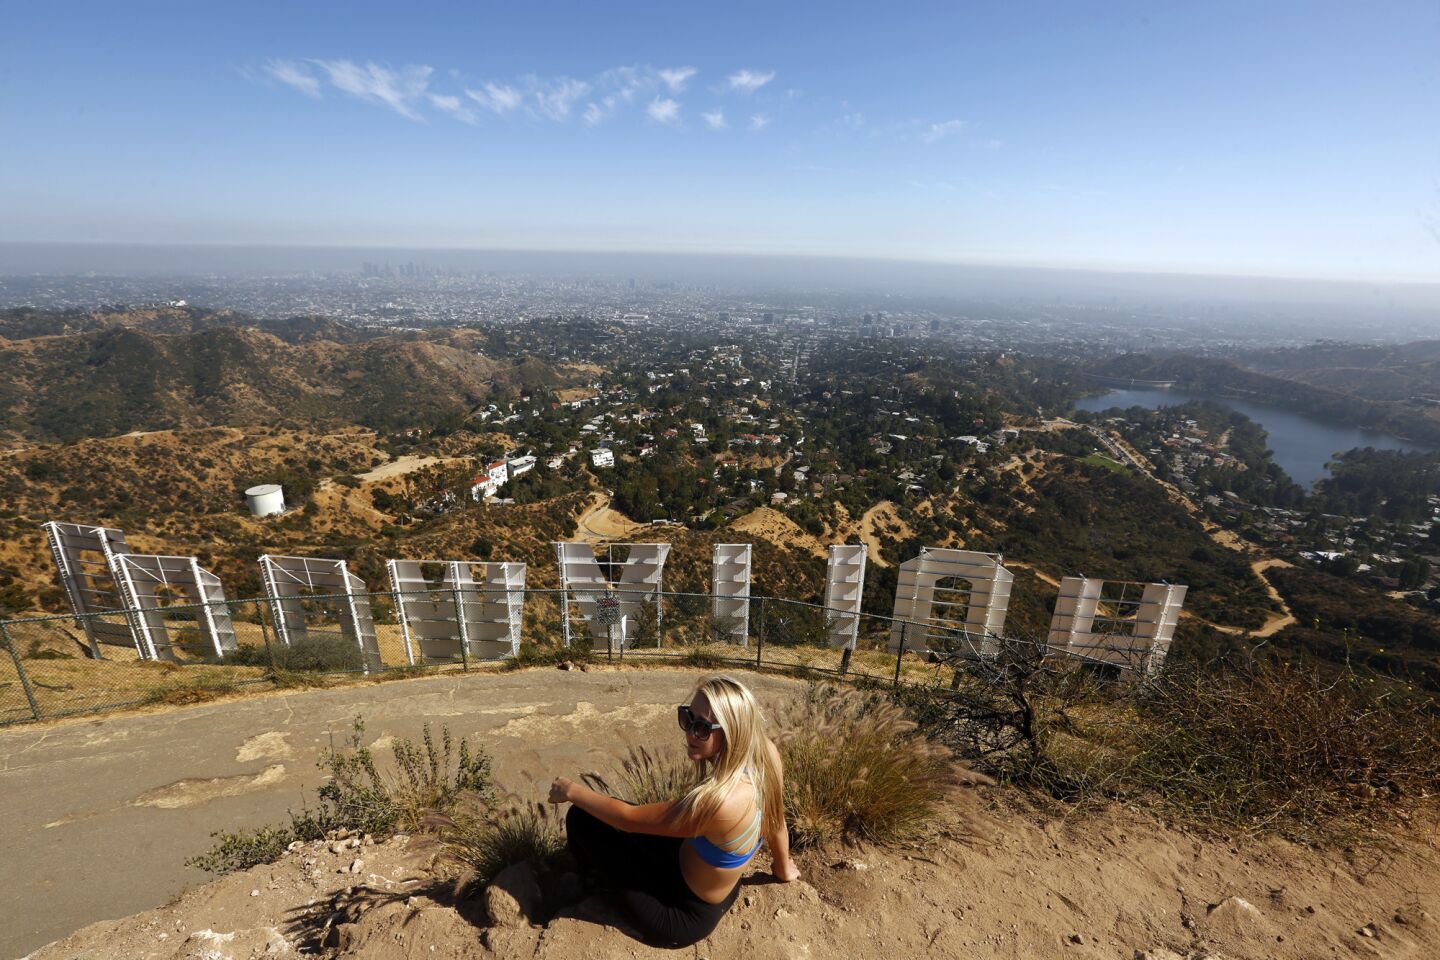 Rachelle Foos of Denver takes in the view from the top of the Mt. Lee Trail behind the Hollywood Sign in Griffith Park. Warner Bros. studio has told city officials it would foot the bill for an aerial tramway to transport visitors to and from the Hollywood sign, starting from a parking structure next to its Burbank lot.